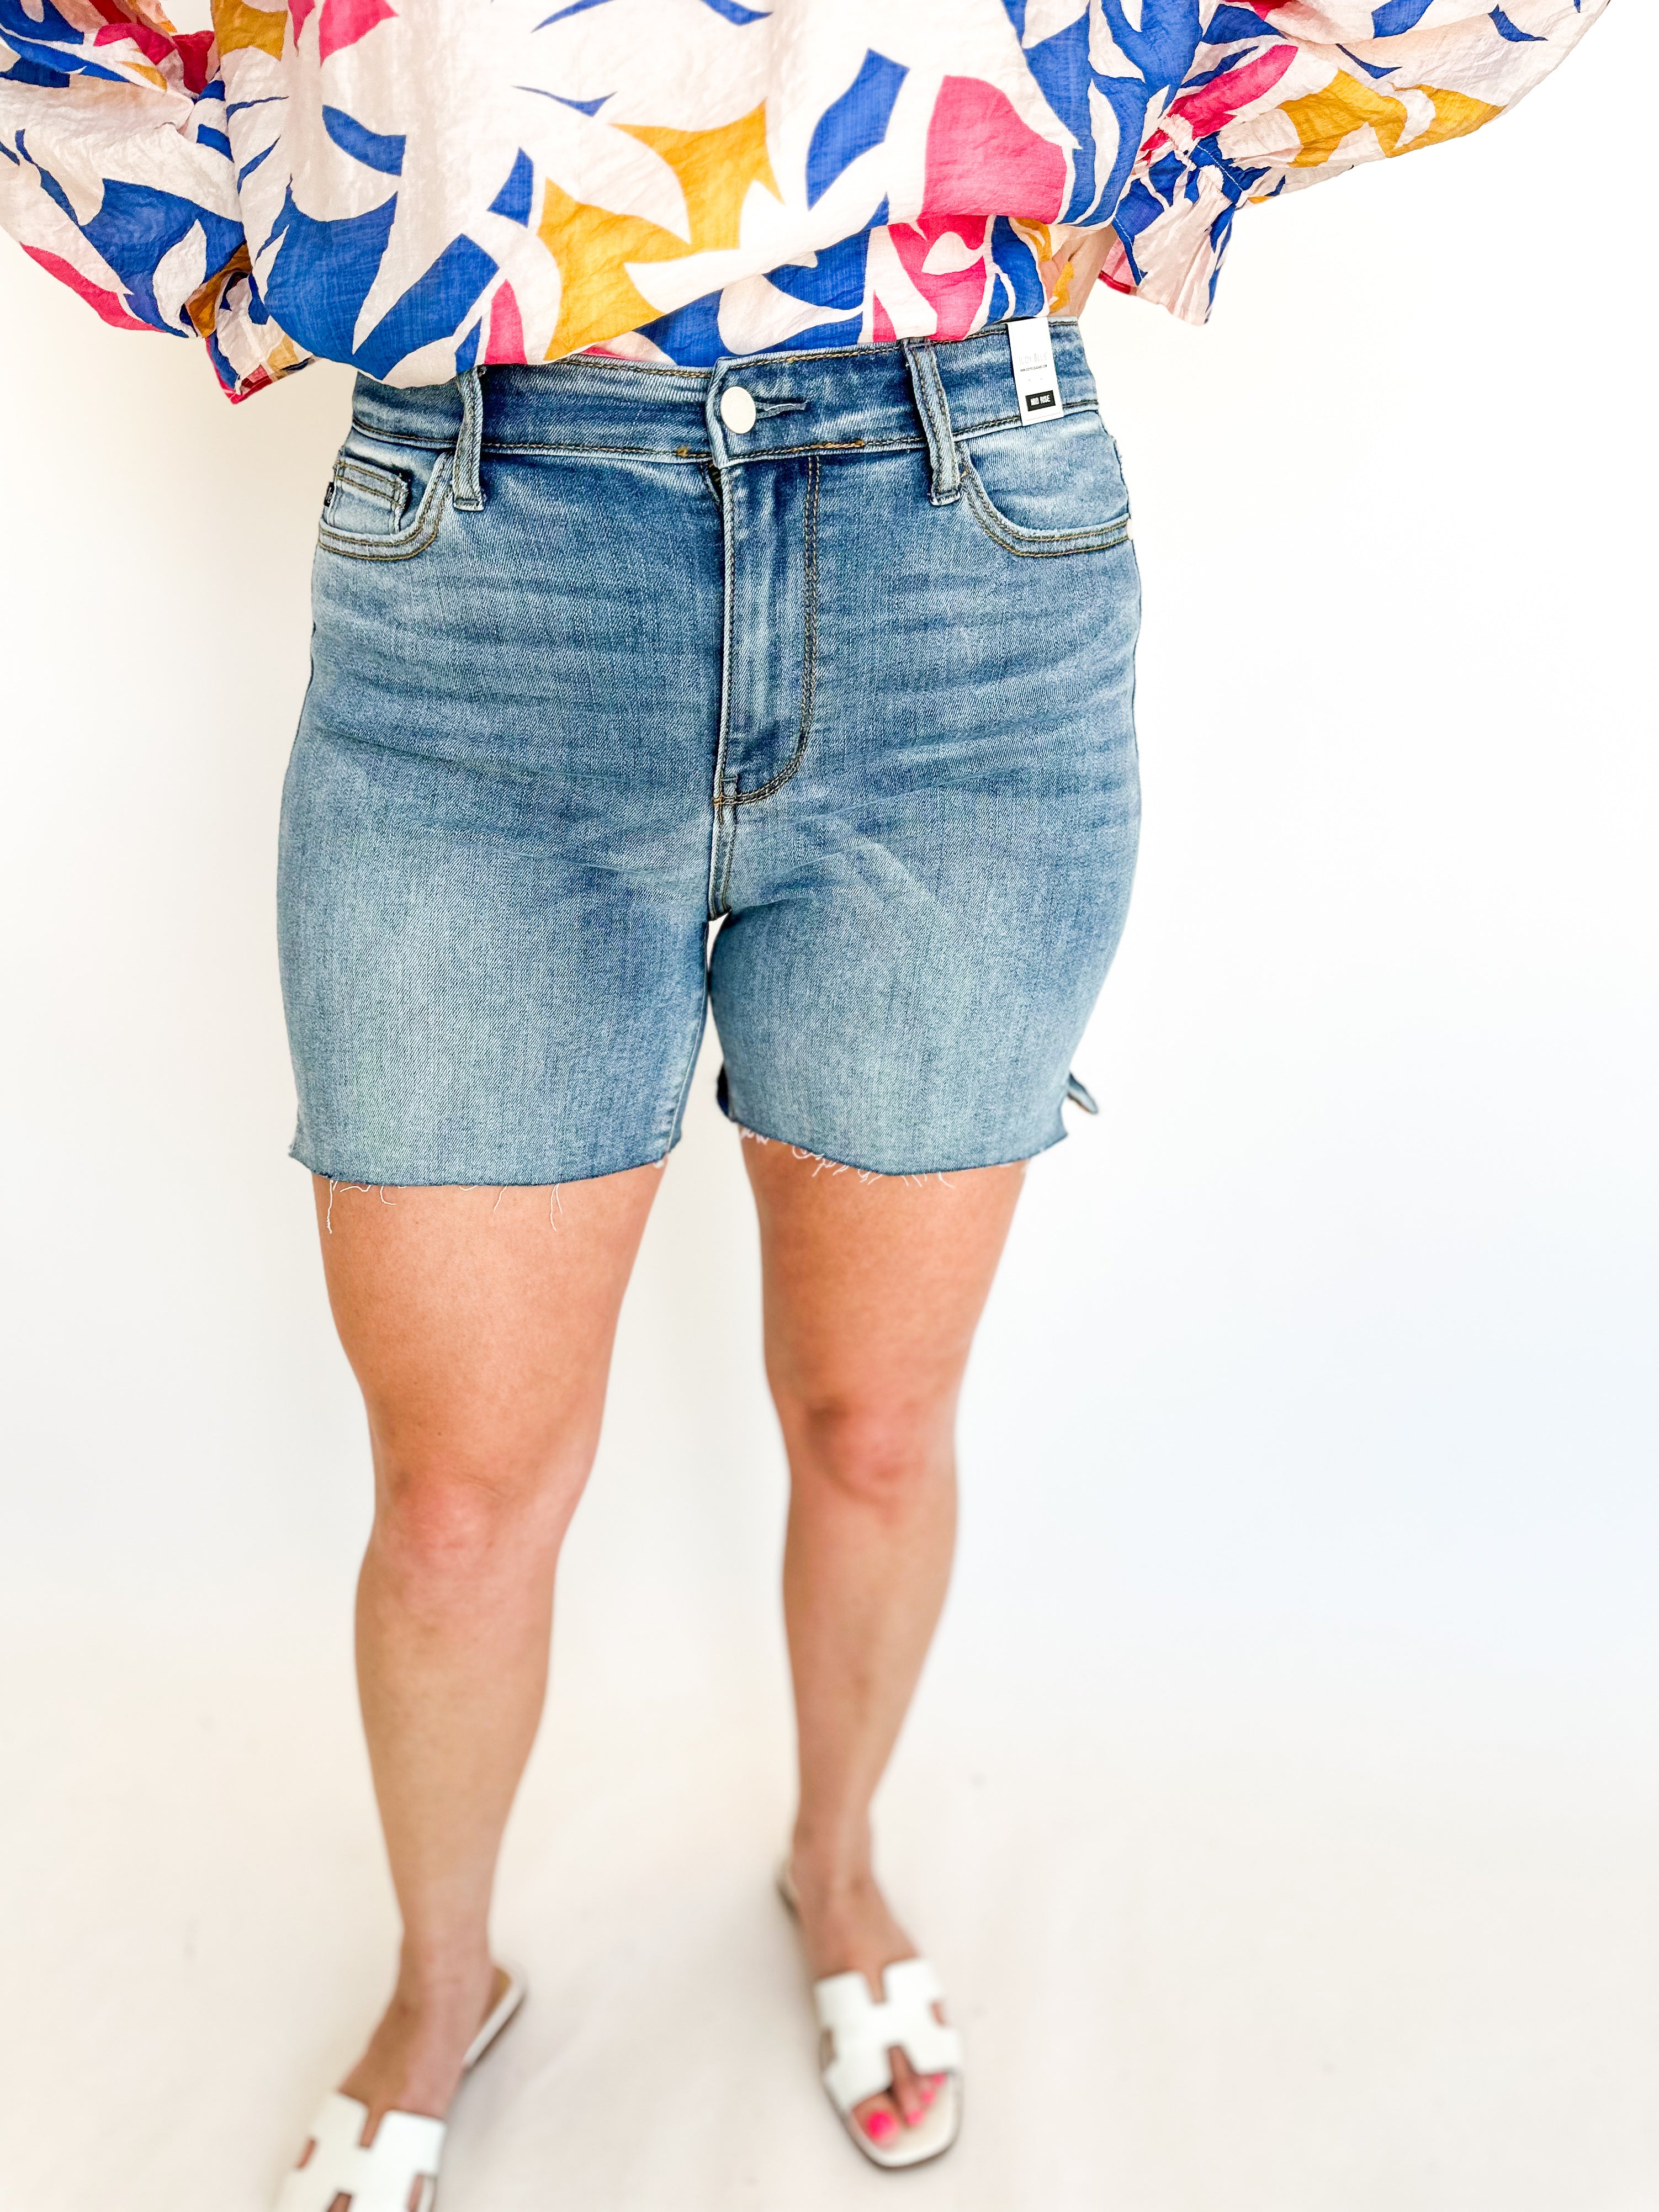 Judy Blue Light Wash Mid Rise Cut Off Shorts-JUDY BLUE-July & June Women's Fashion Boutique Located in San Antonio, Texas